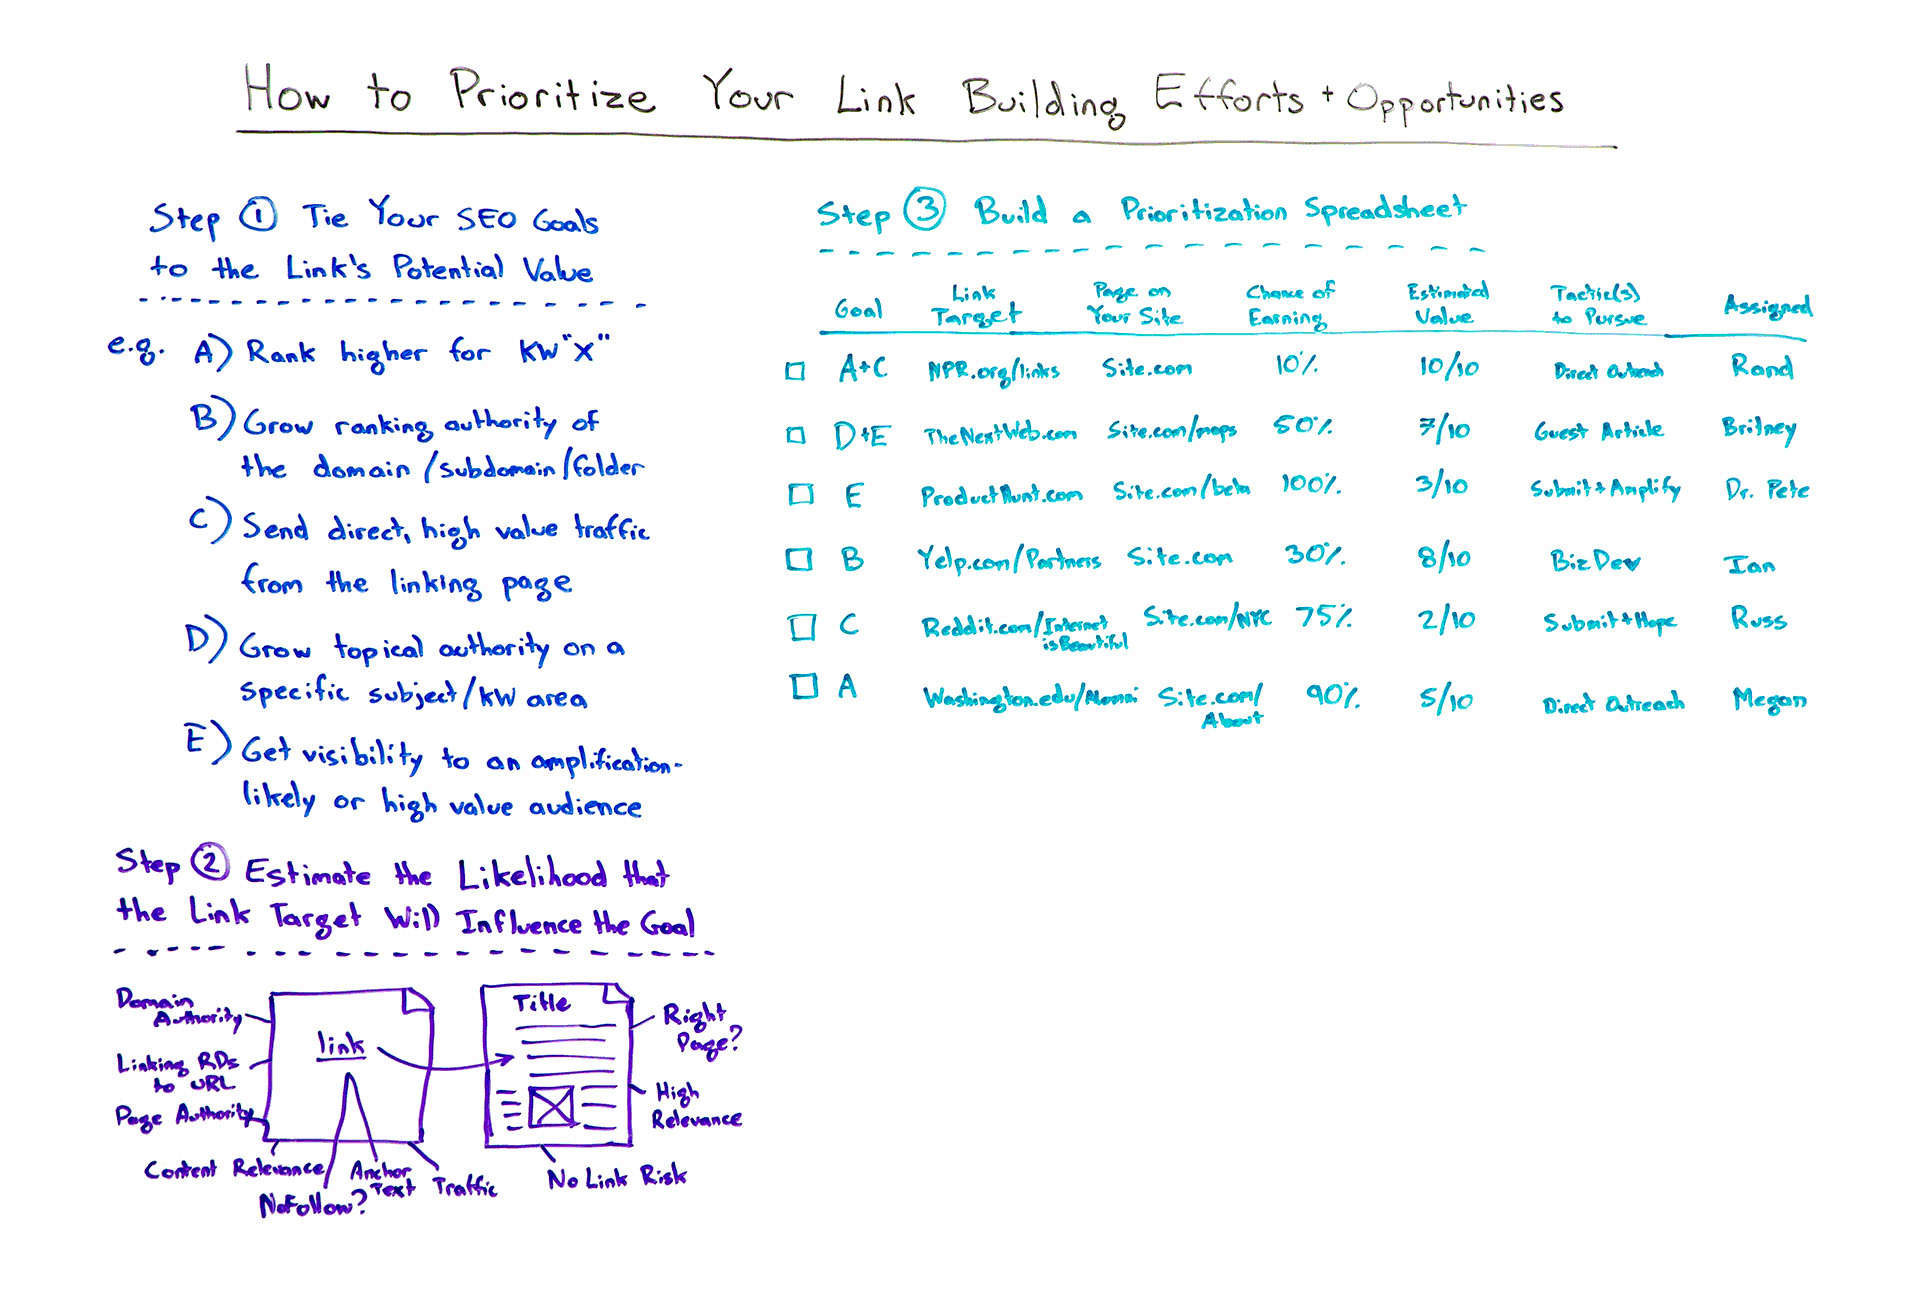 Prioritize your link building efforts and opportunities